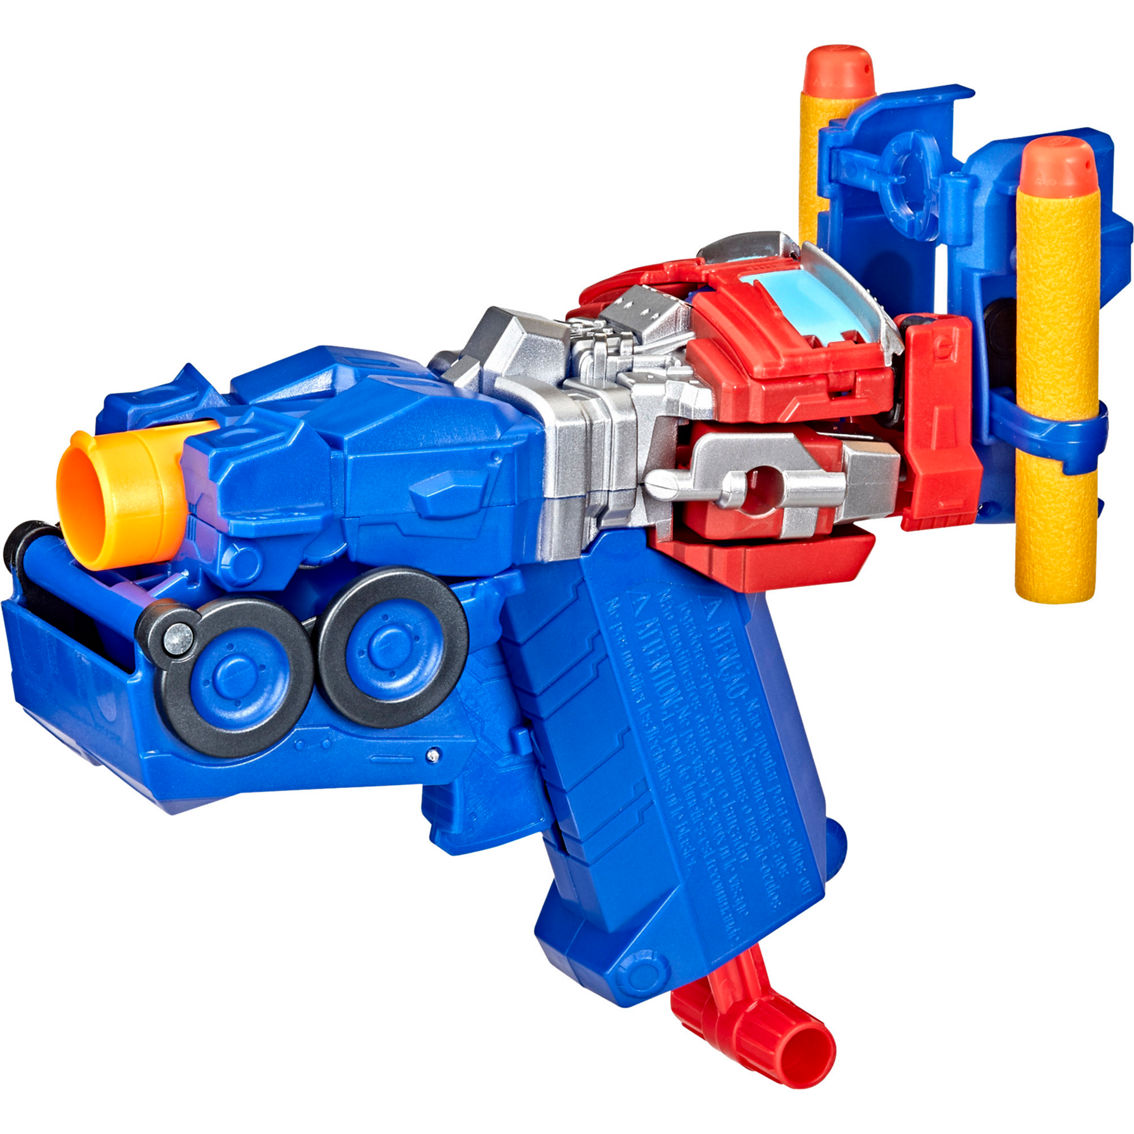 Transformers: Rise of the Beasts 2-in-1 Optimus Prime Blaster - Image 3 of 5